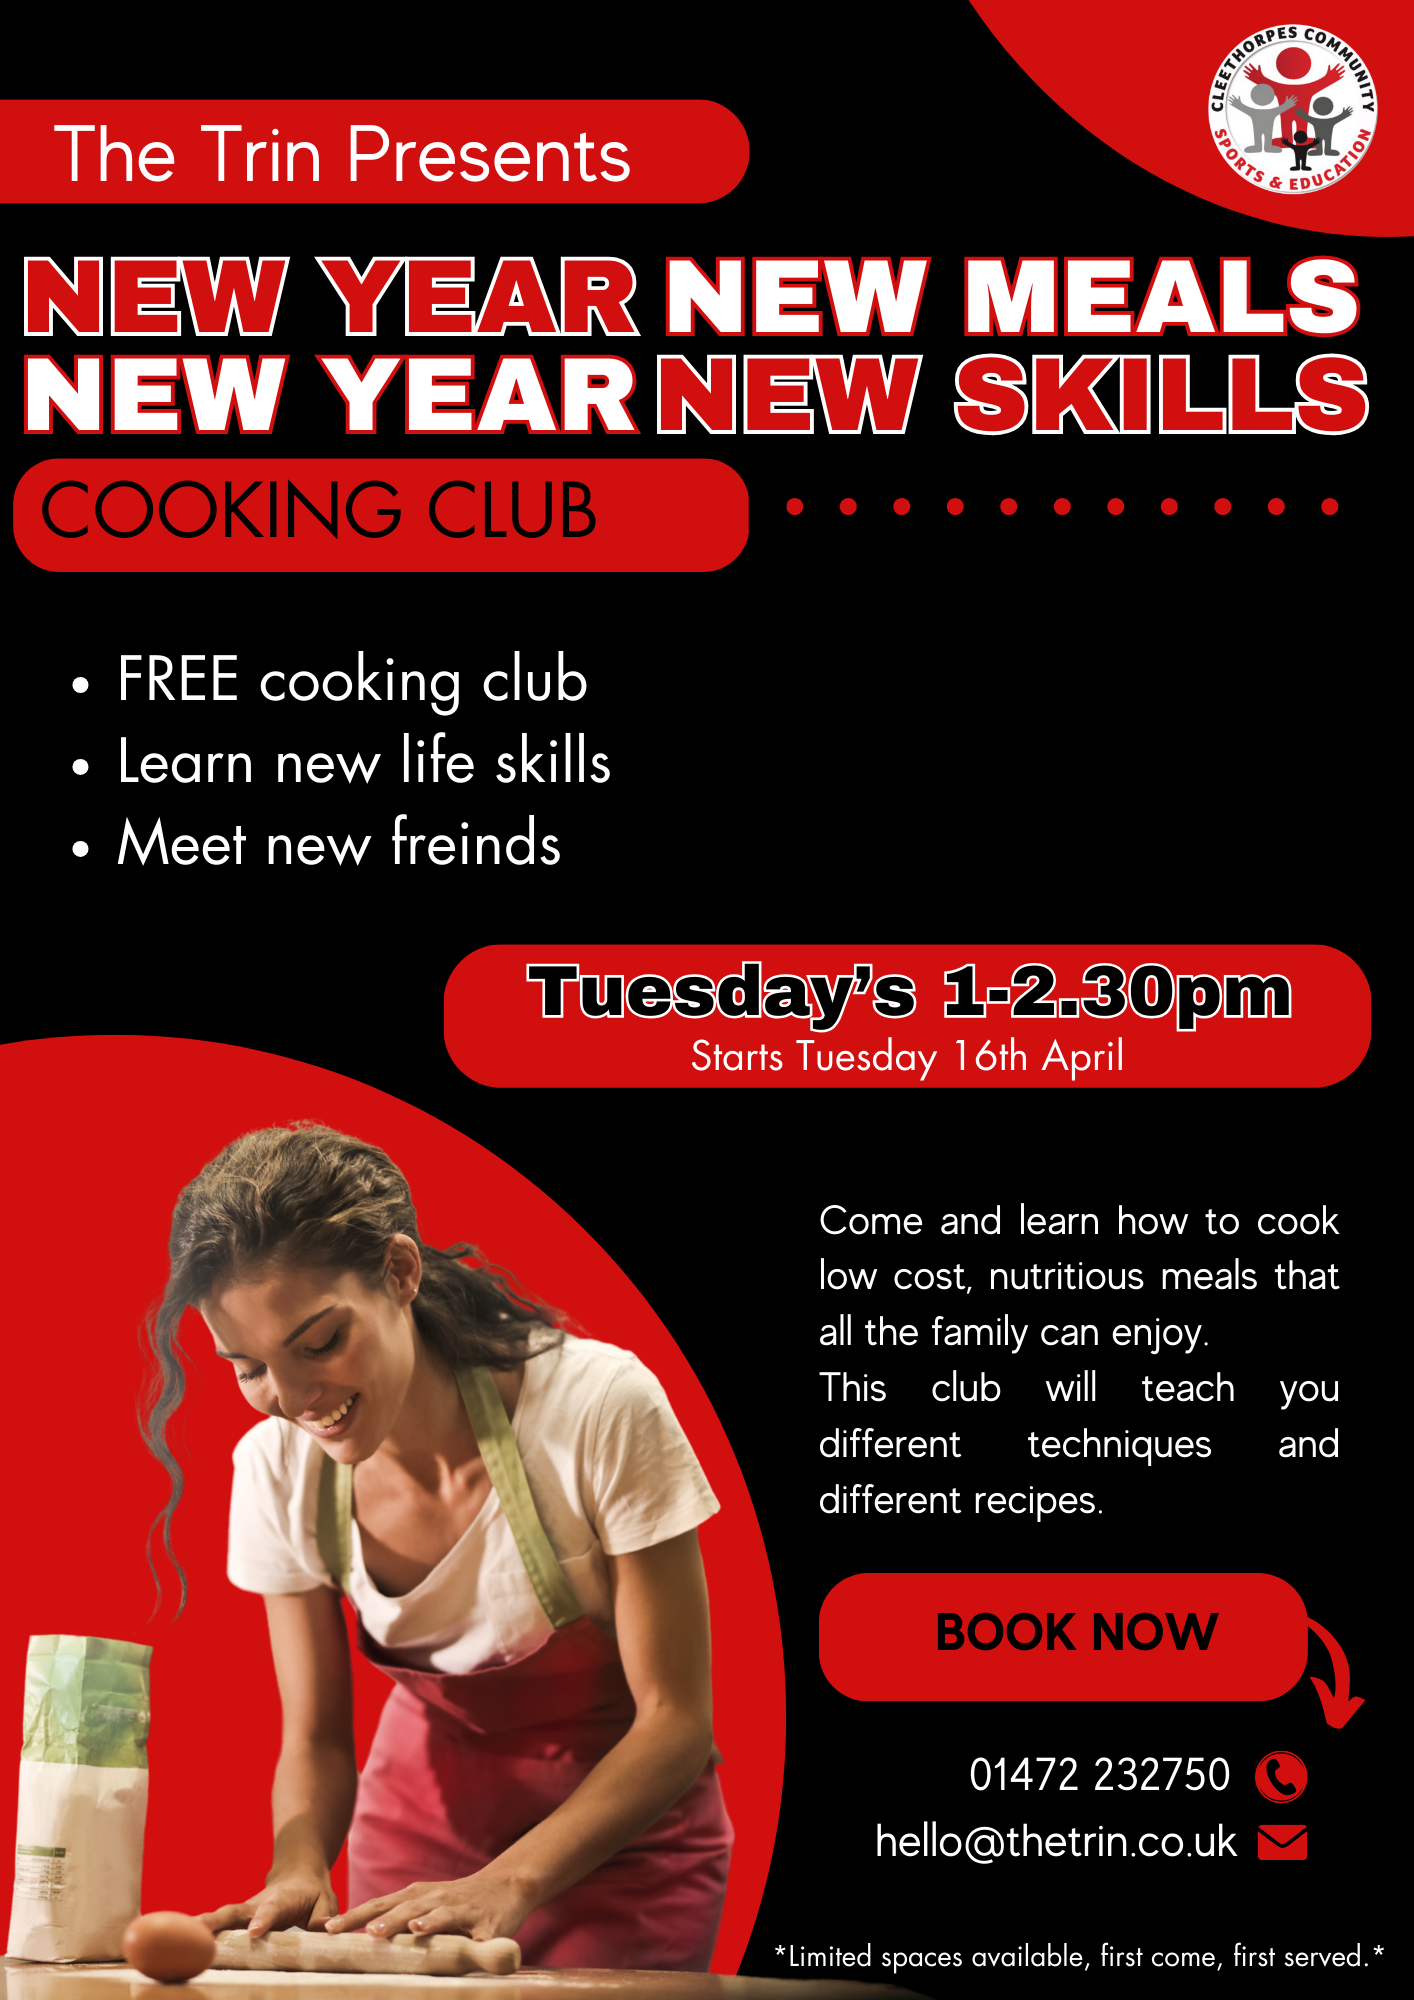 Cook Club - Tuesday's 1pm till 2.30pm